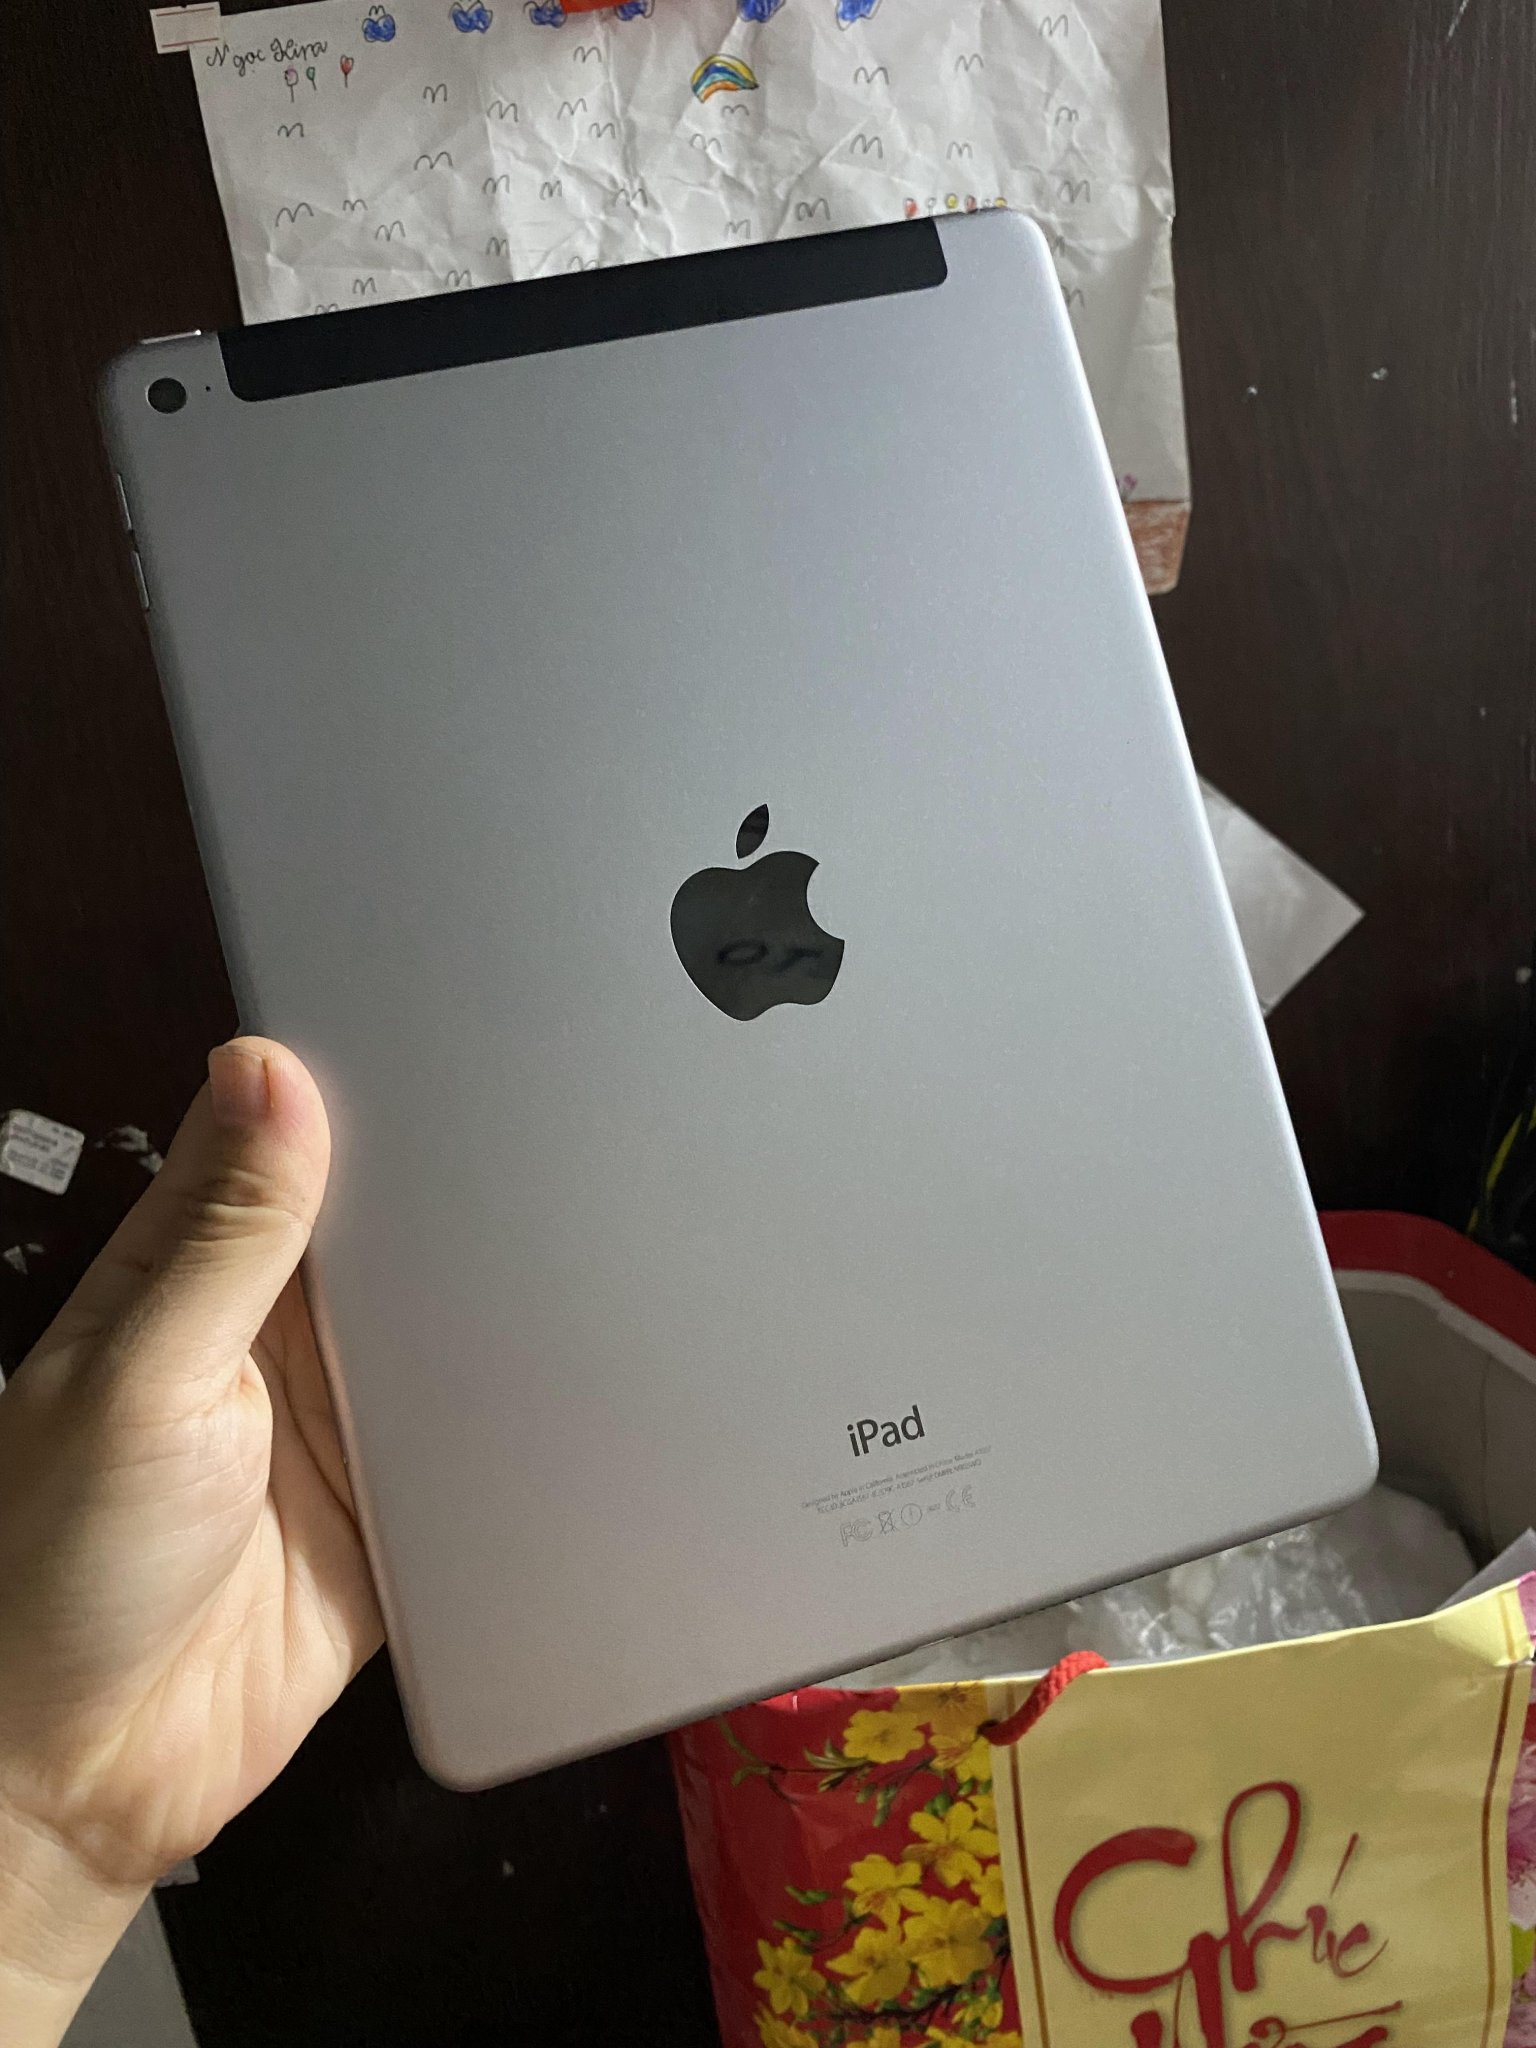 Apple iPad Air 2 64gb Space Gray WiFi and Cellular Unlocked and in Full ...